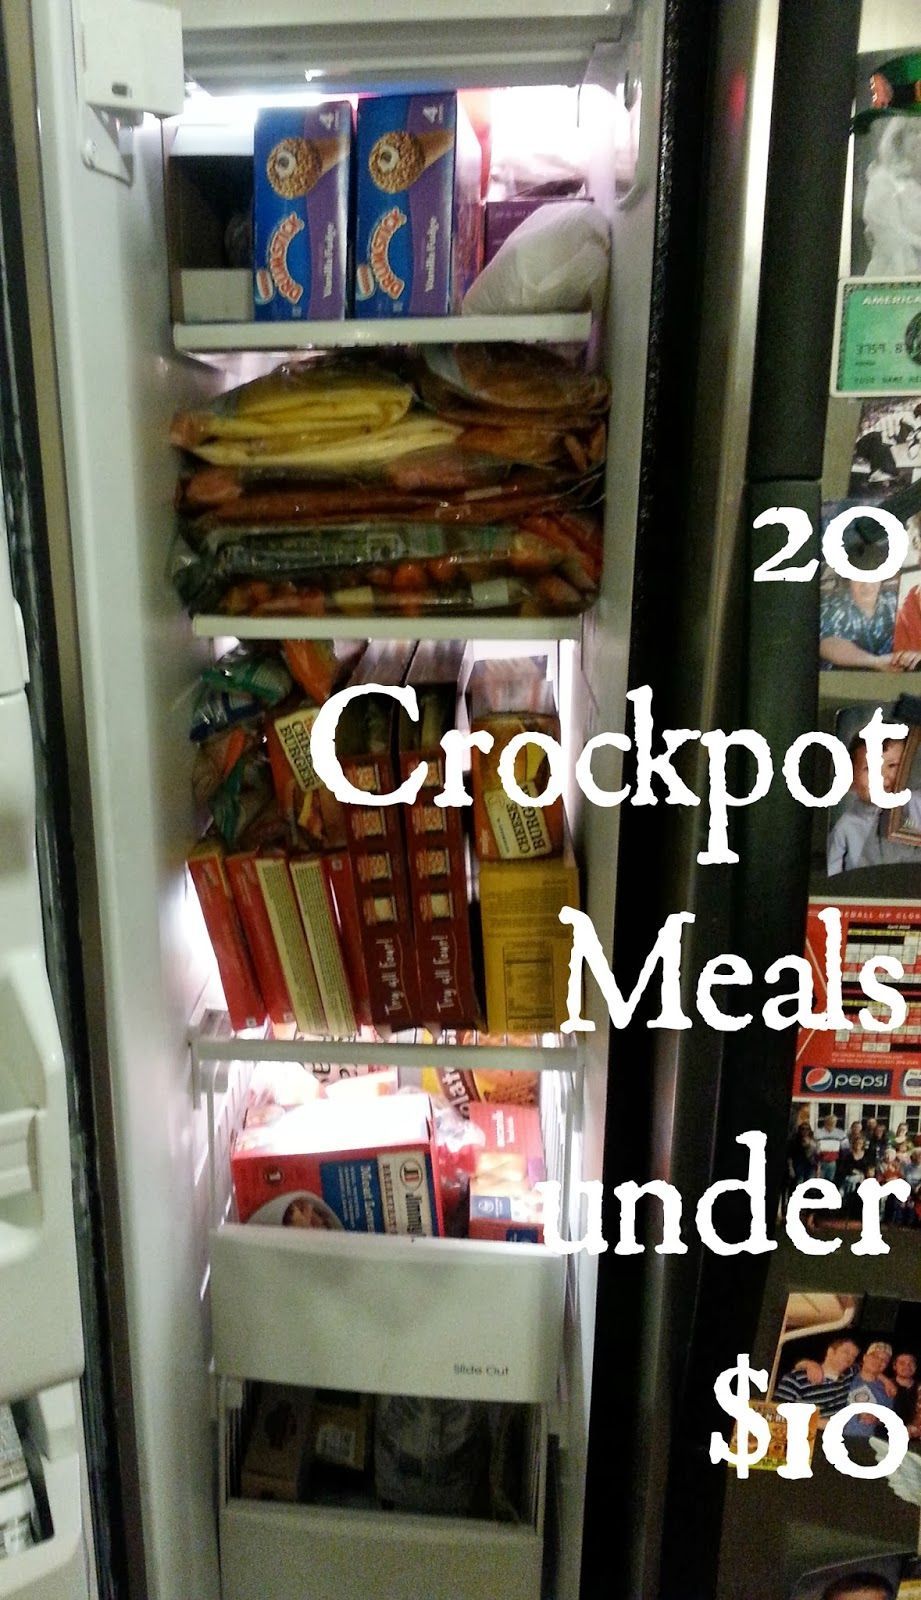 I Have A New Site Called Chocolates and Crockpots! Come Check It Out!: 20 Crockpot meals under